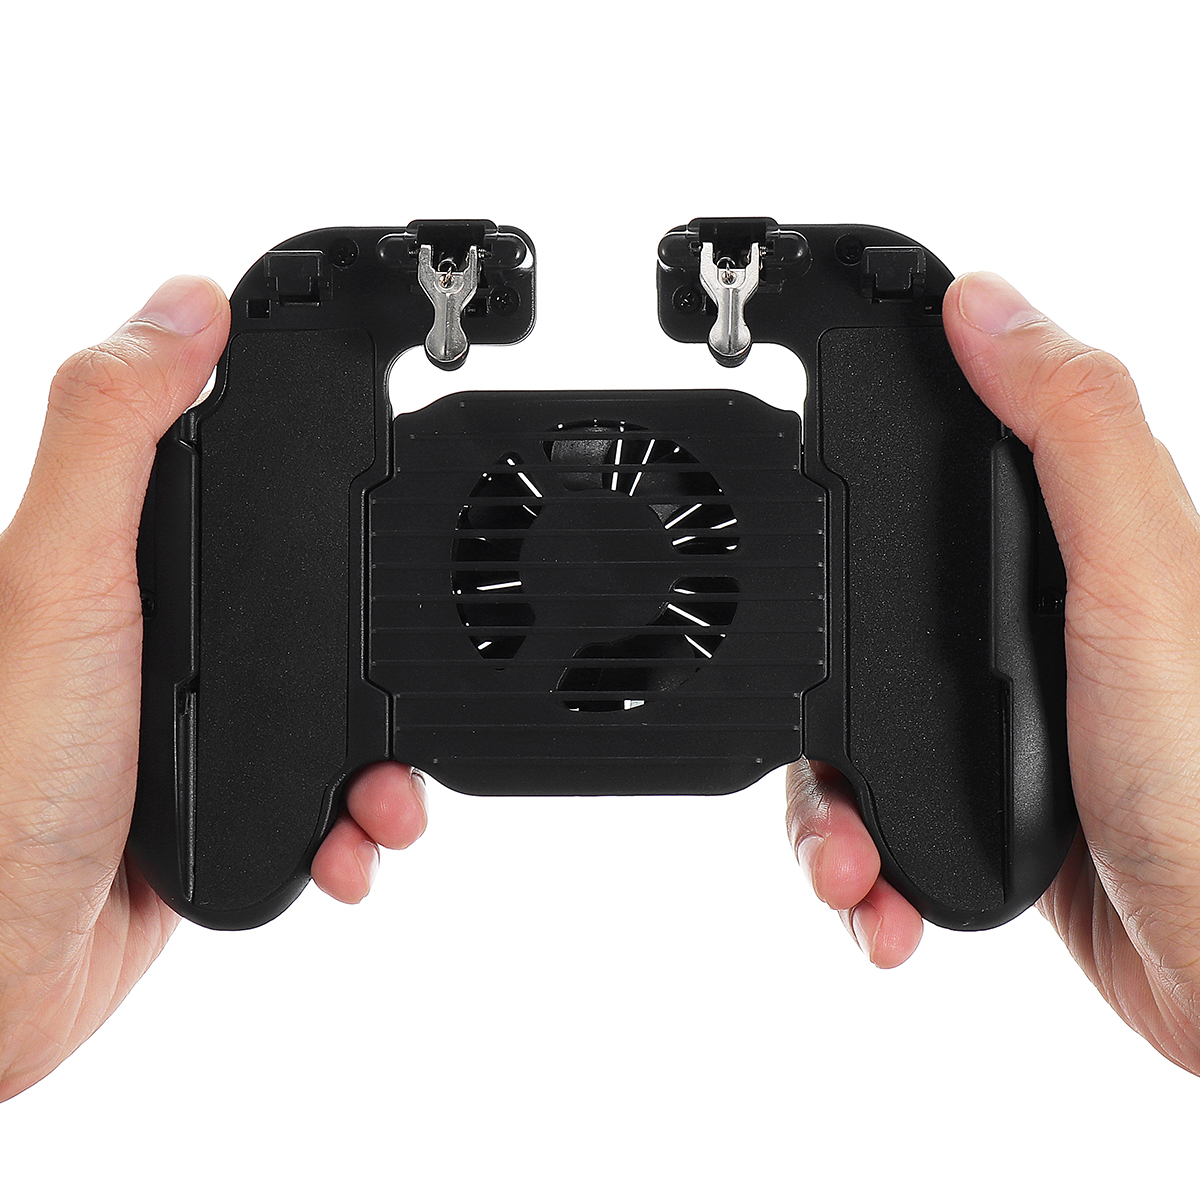 

Gamepad Controller Joystick Cooling Fan Bracket Holder for PUBG Mobile Game for IOS Android Phone